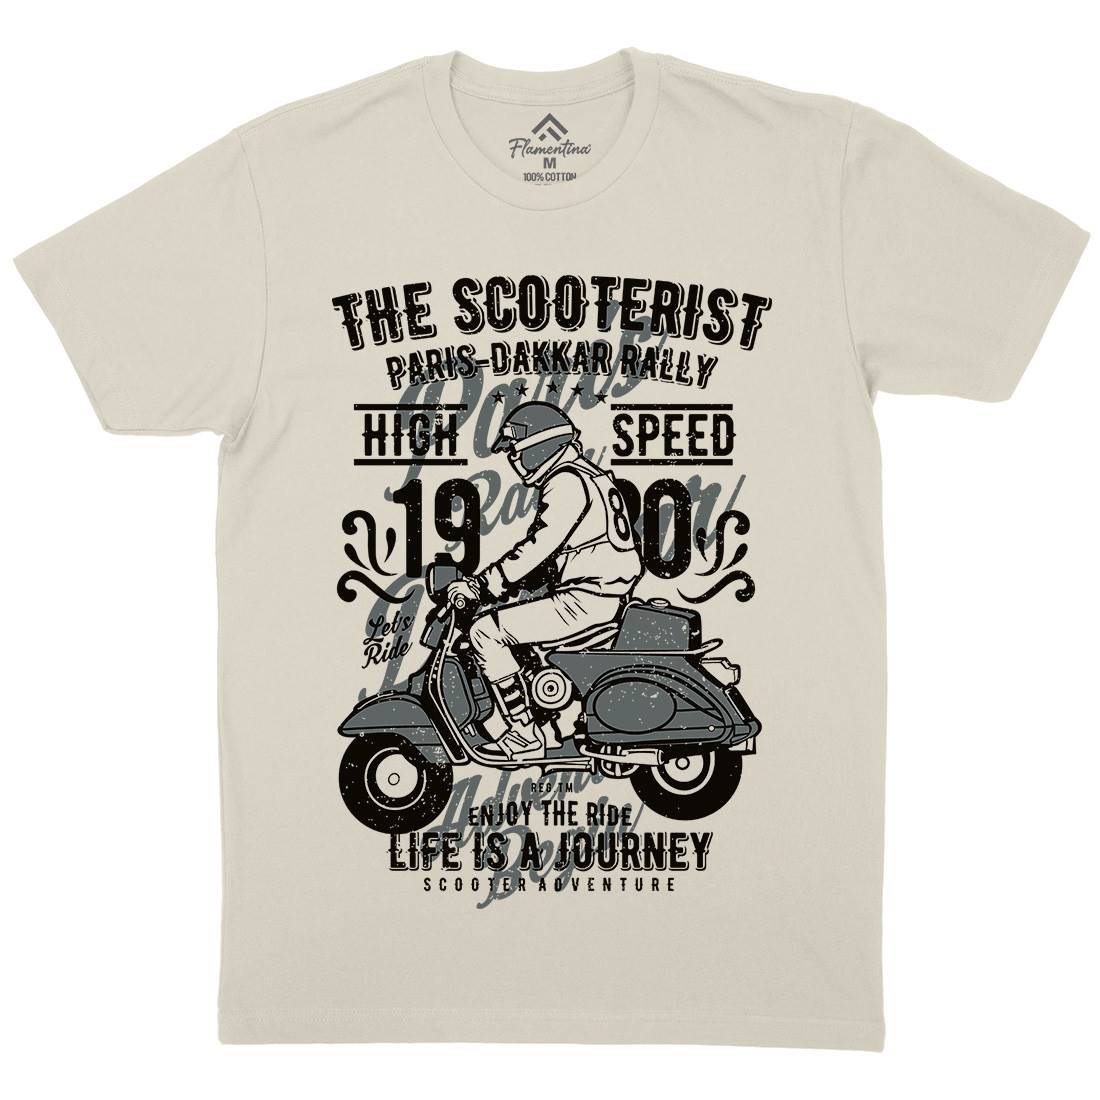 Scooterist 1980 Mens Organic Crew Neck T-Shirt Motorcycles A774